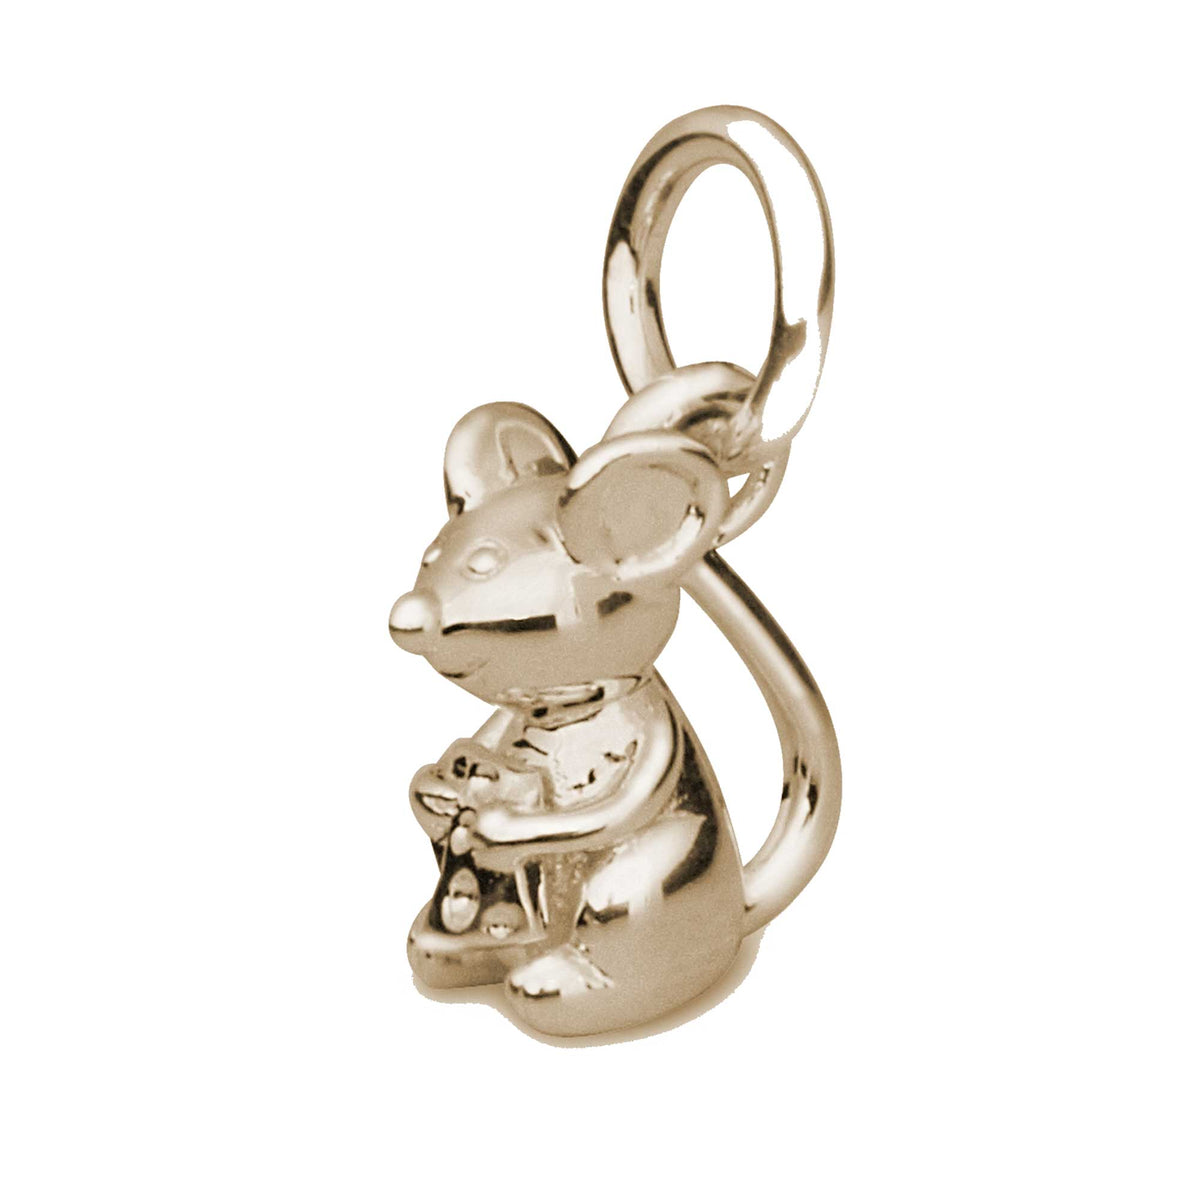 Solid gold mouse charm Scarlett Jewellery 9kt gold bracelet charms animal